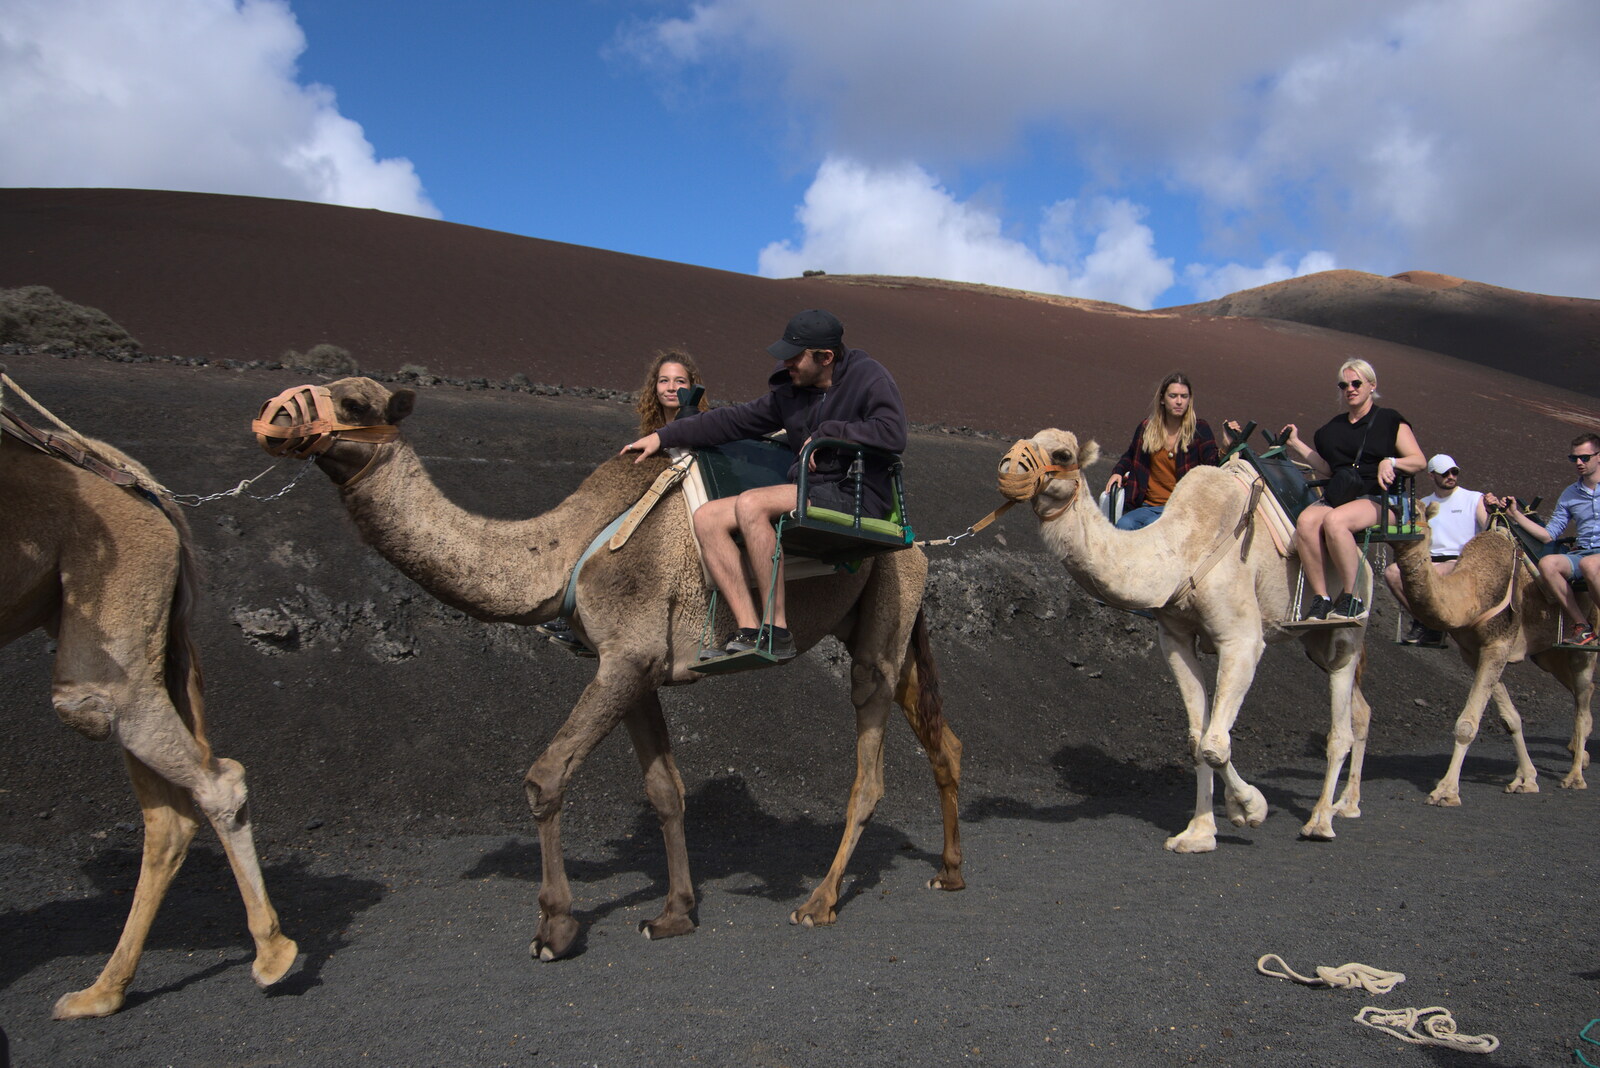 Another camel group comes in from The Volcanoes of Lanzarote, Canary Islands, Spain - 27th October 2021